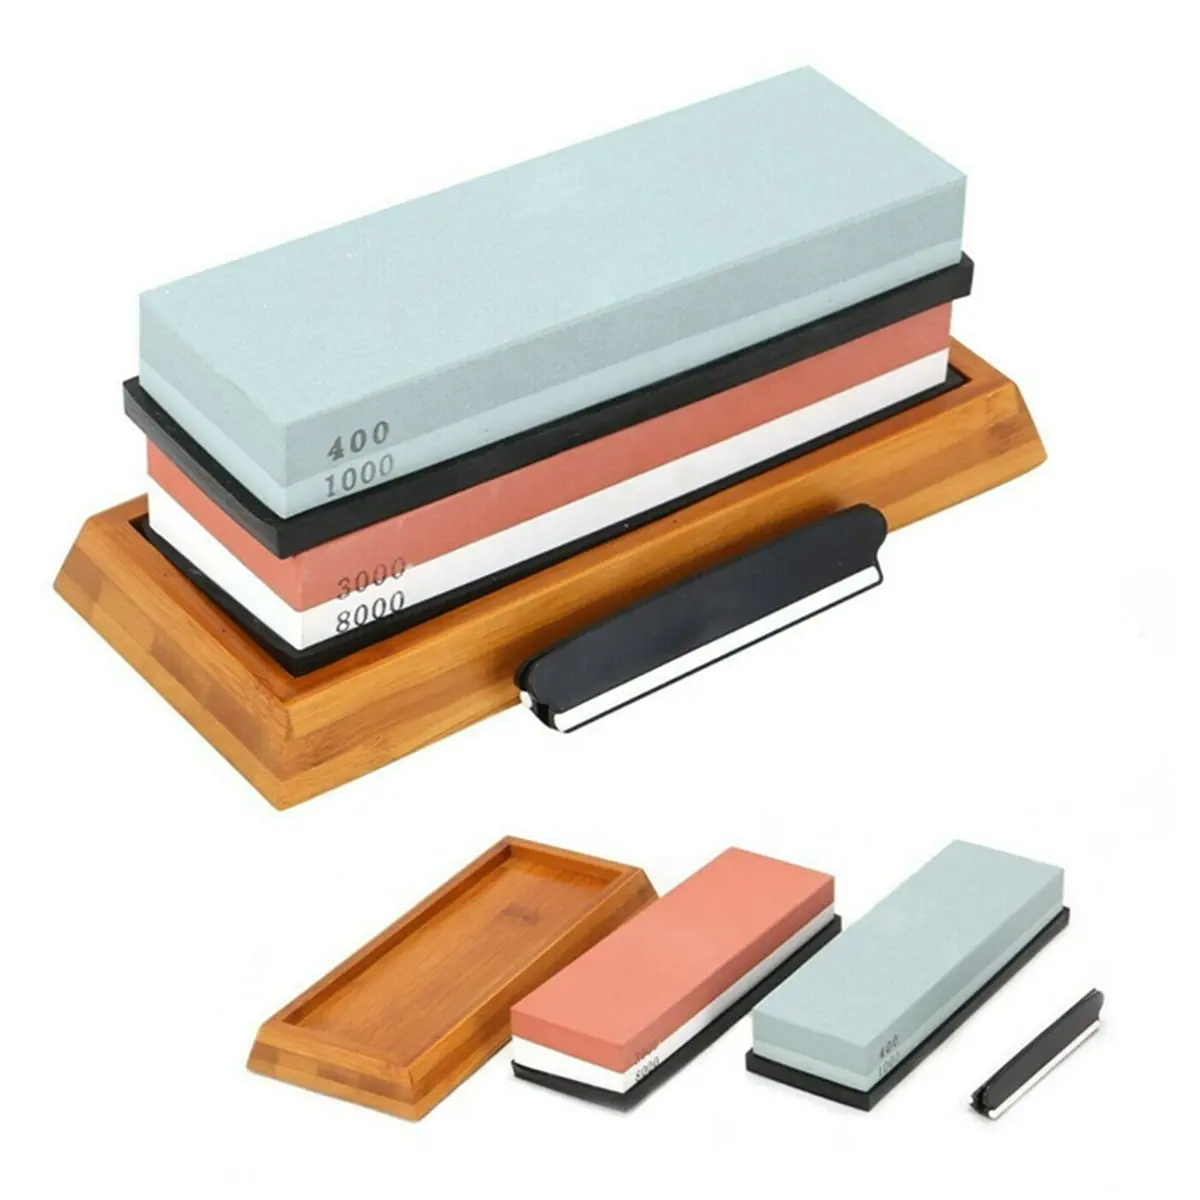 400/1000 3000/8000 wet stone water natural combination knife sharpening stone kit